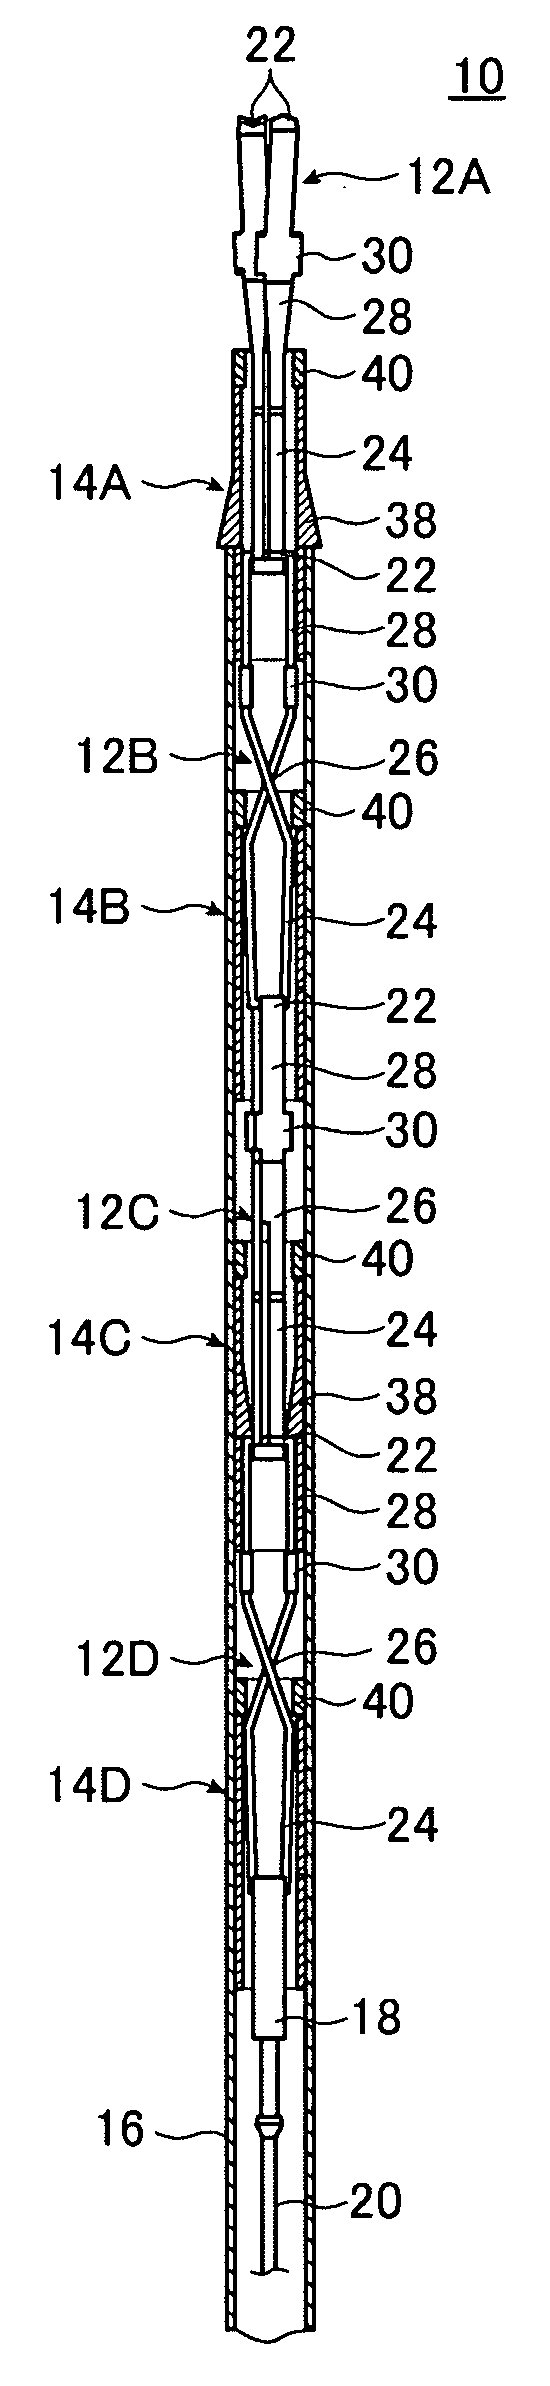 Magazine type clipping device